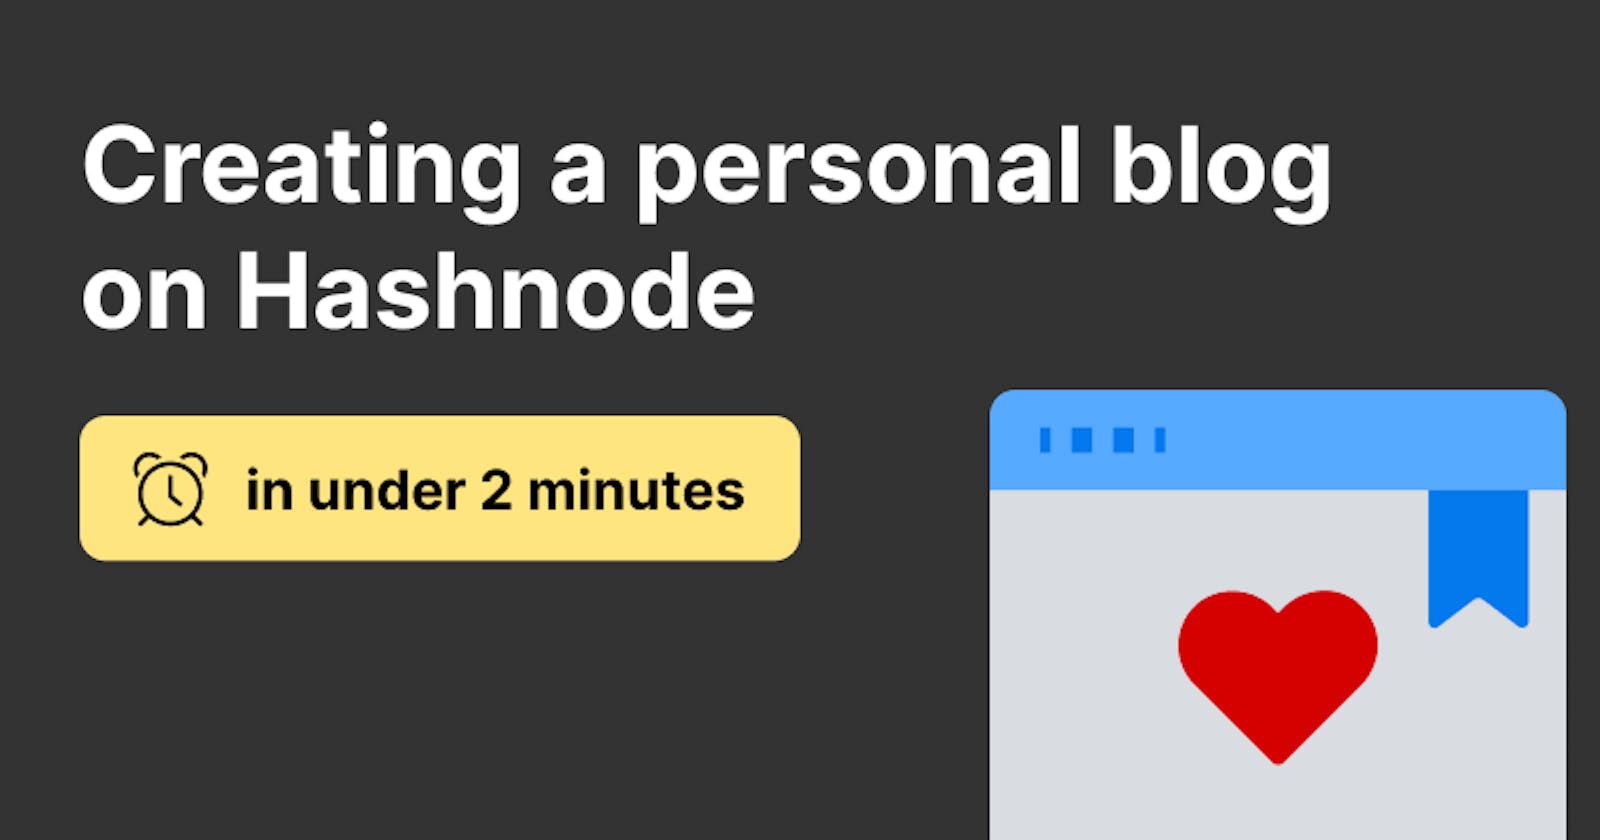 Create a personal blog on Hashnode in under 2 minutes -- for developers